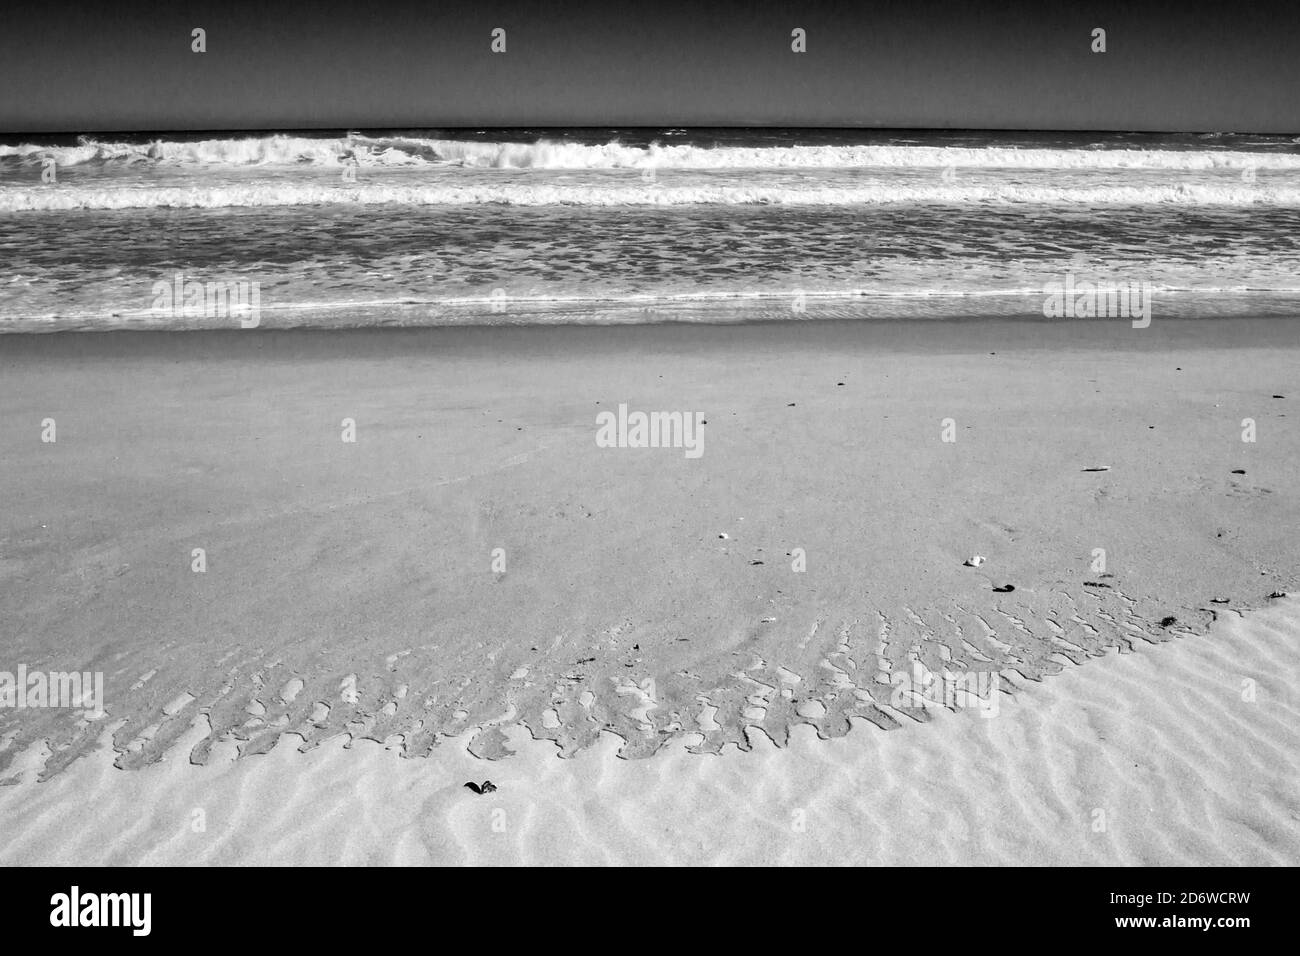 Patterns left behind on a sandy beach after a wave retreated in Monochrome, photographed at the west coast of South Africa Stock Photo